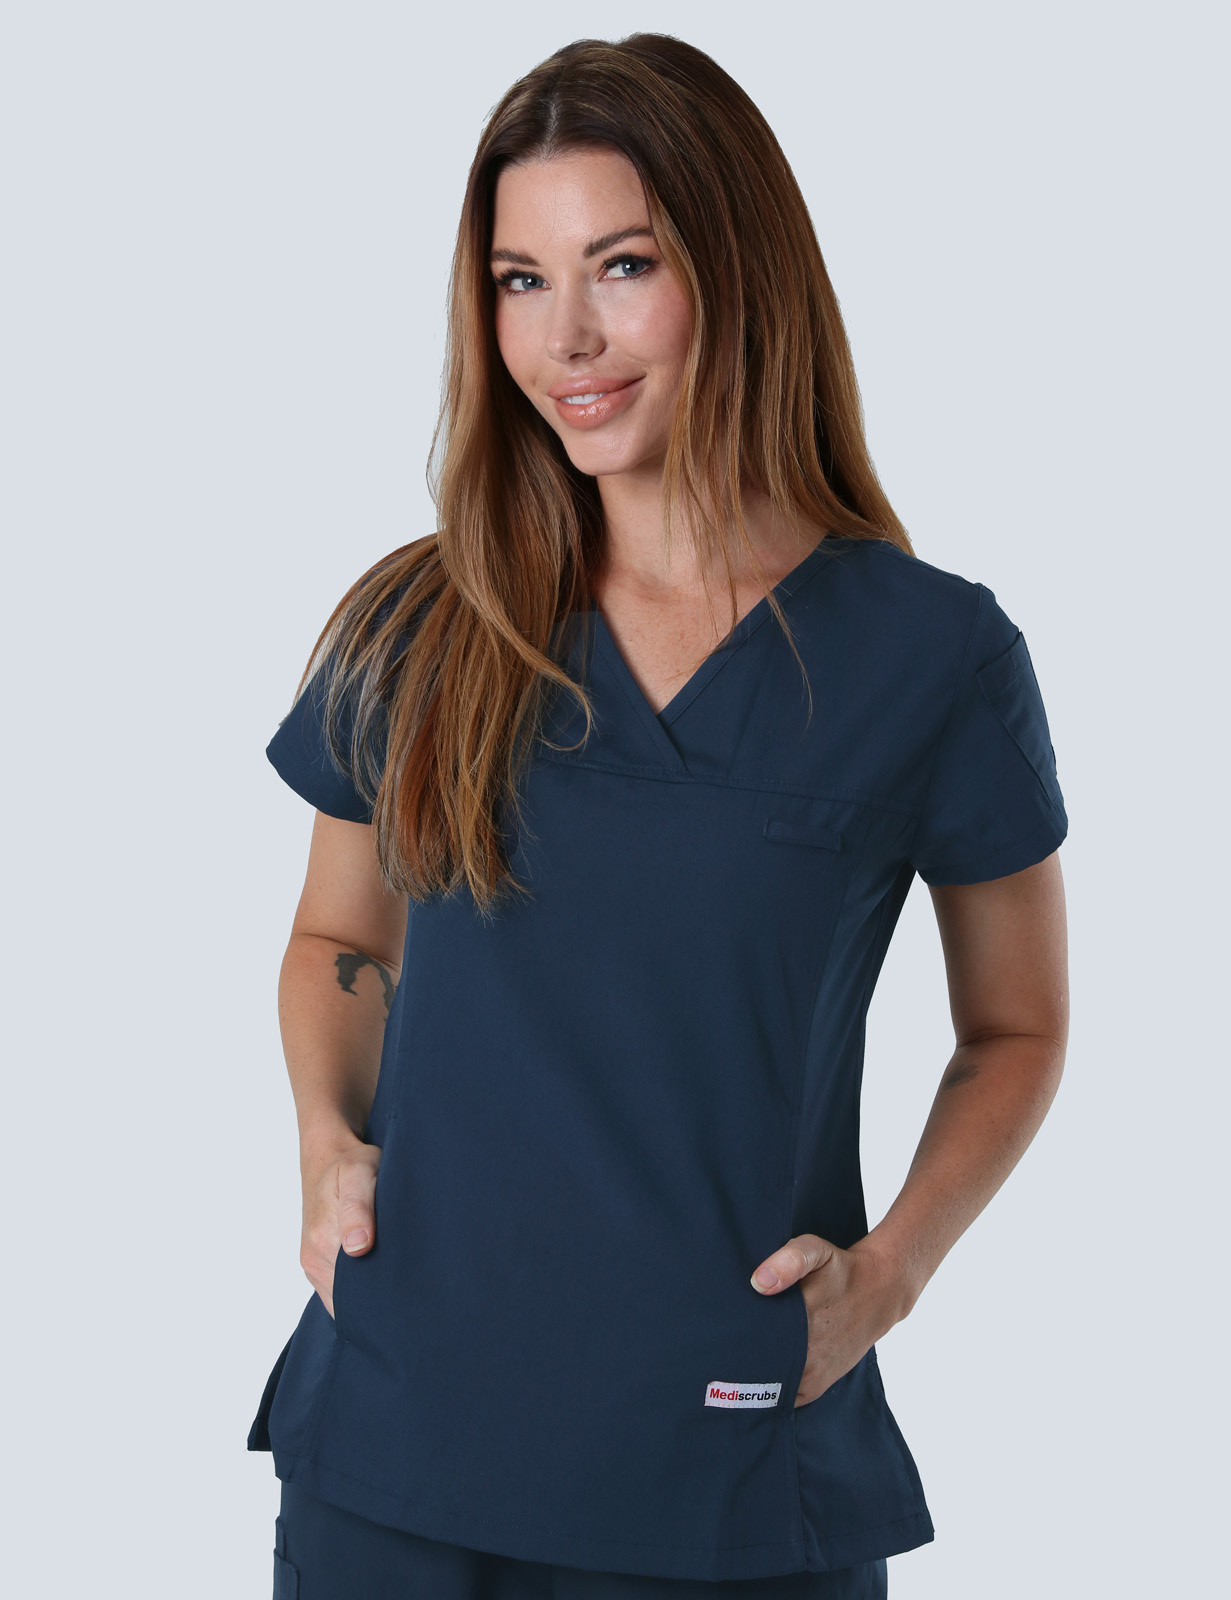 Bundaberg Hospital - Radiographer (Women's Fit Solid Scrub Top and Cargo Pants in Navy incl Logos)